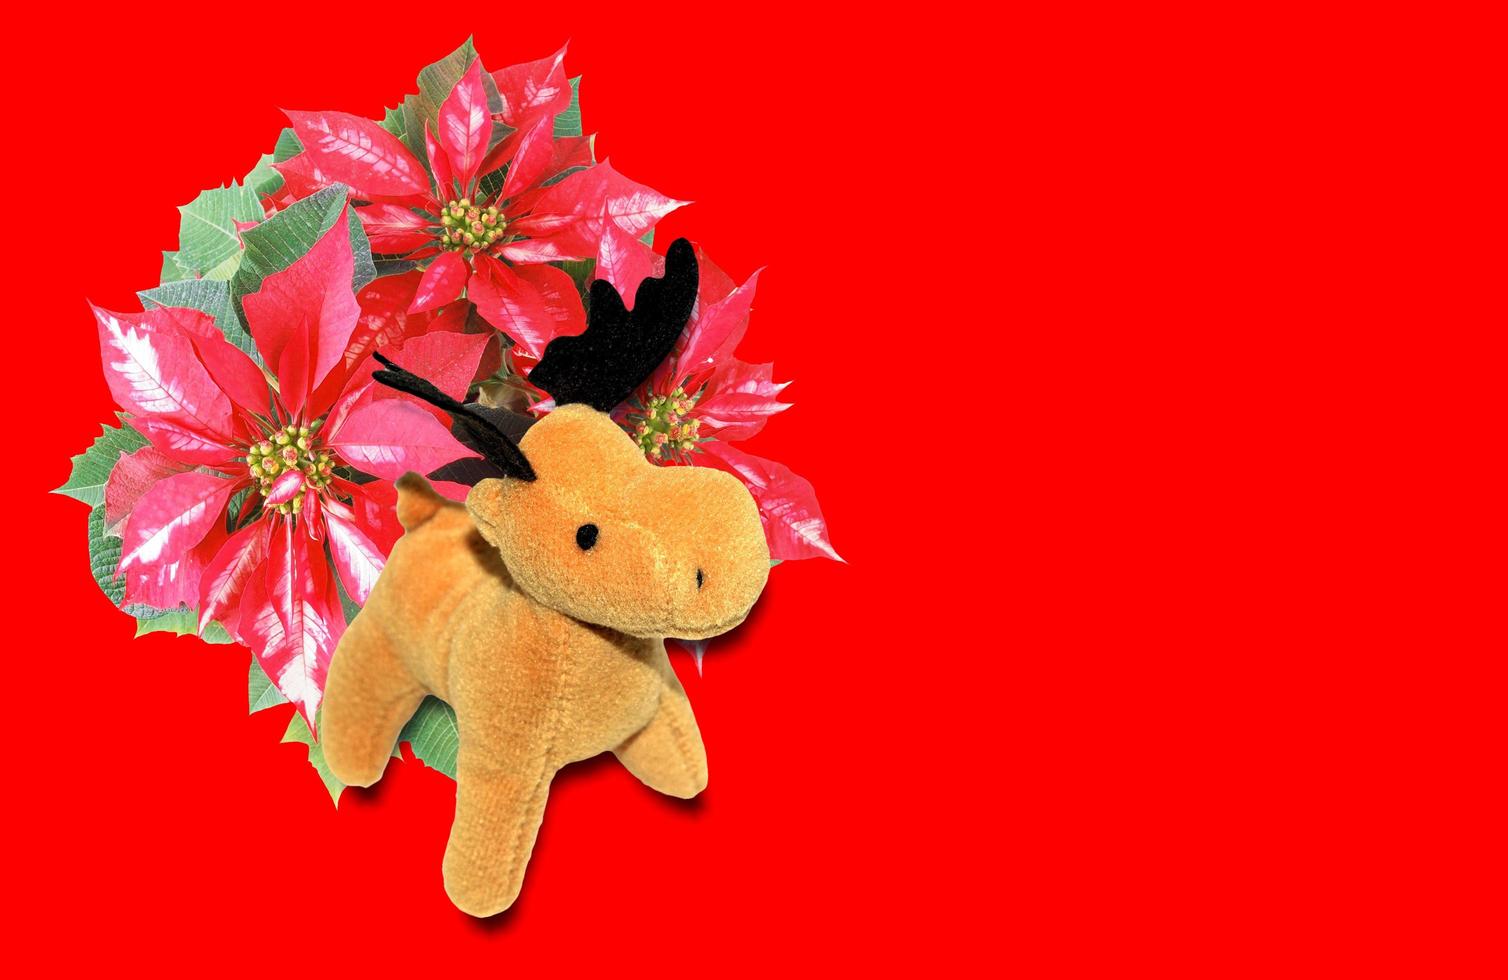 Poinsettia Christmas Star with deer moose photo